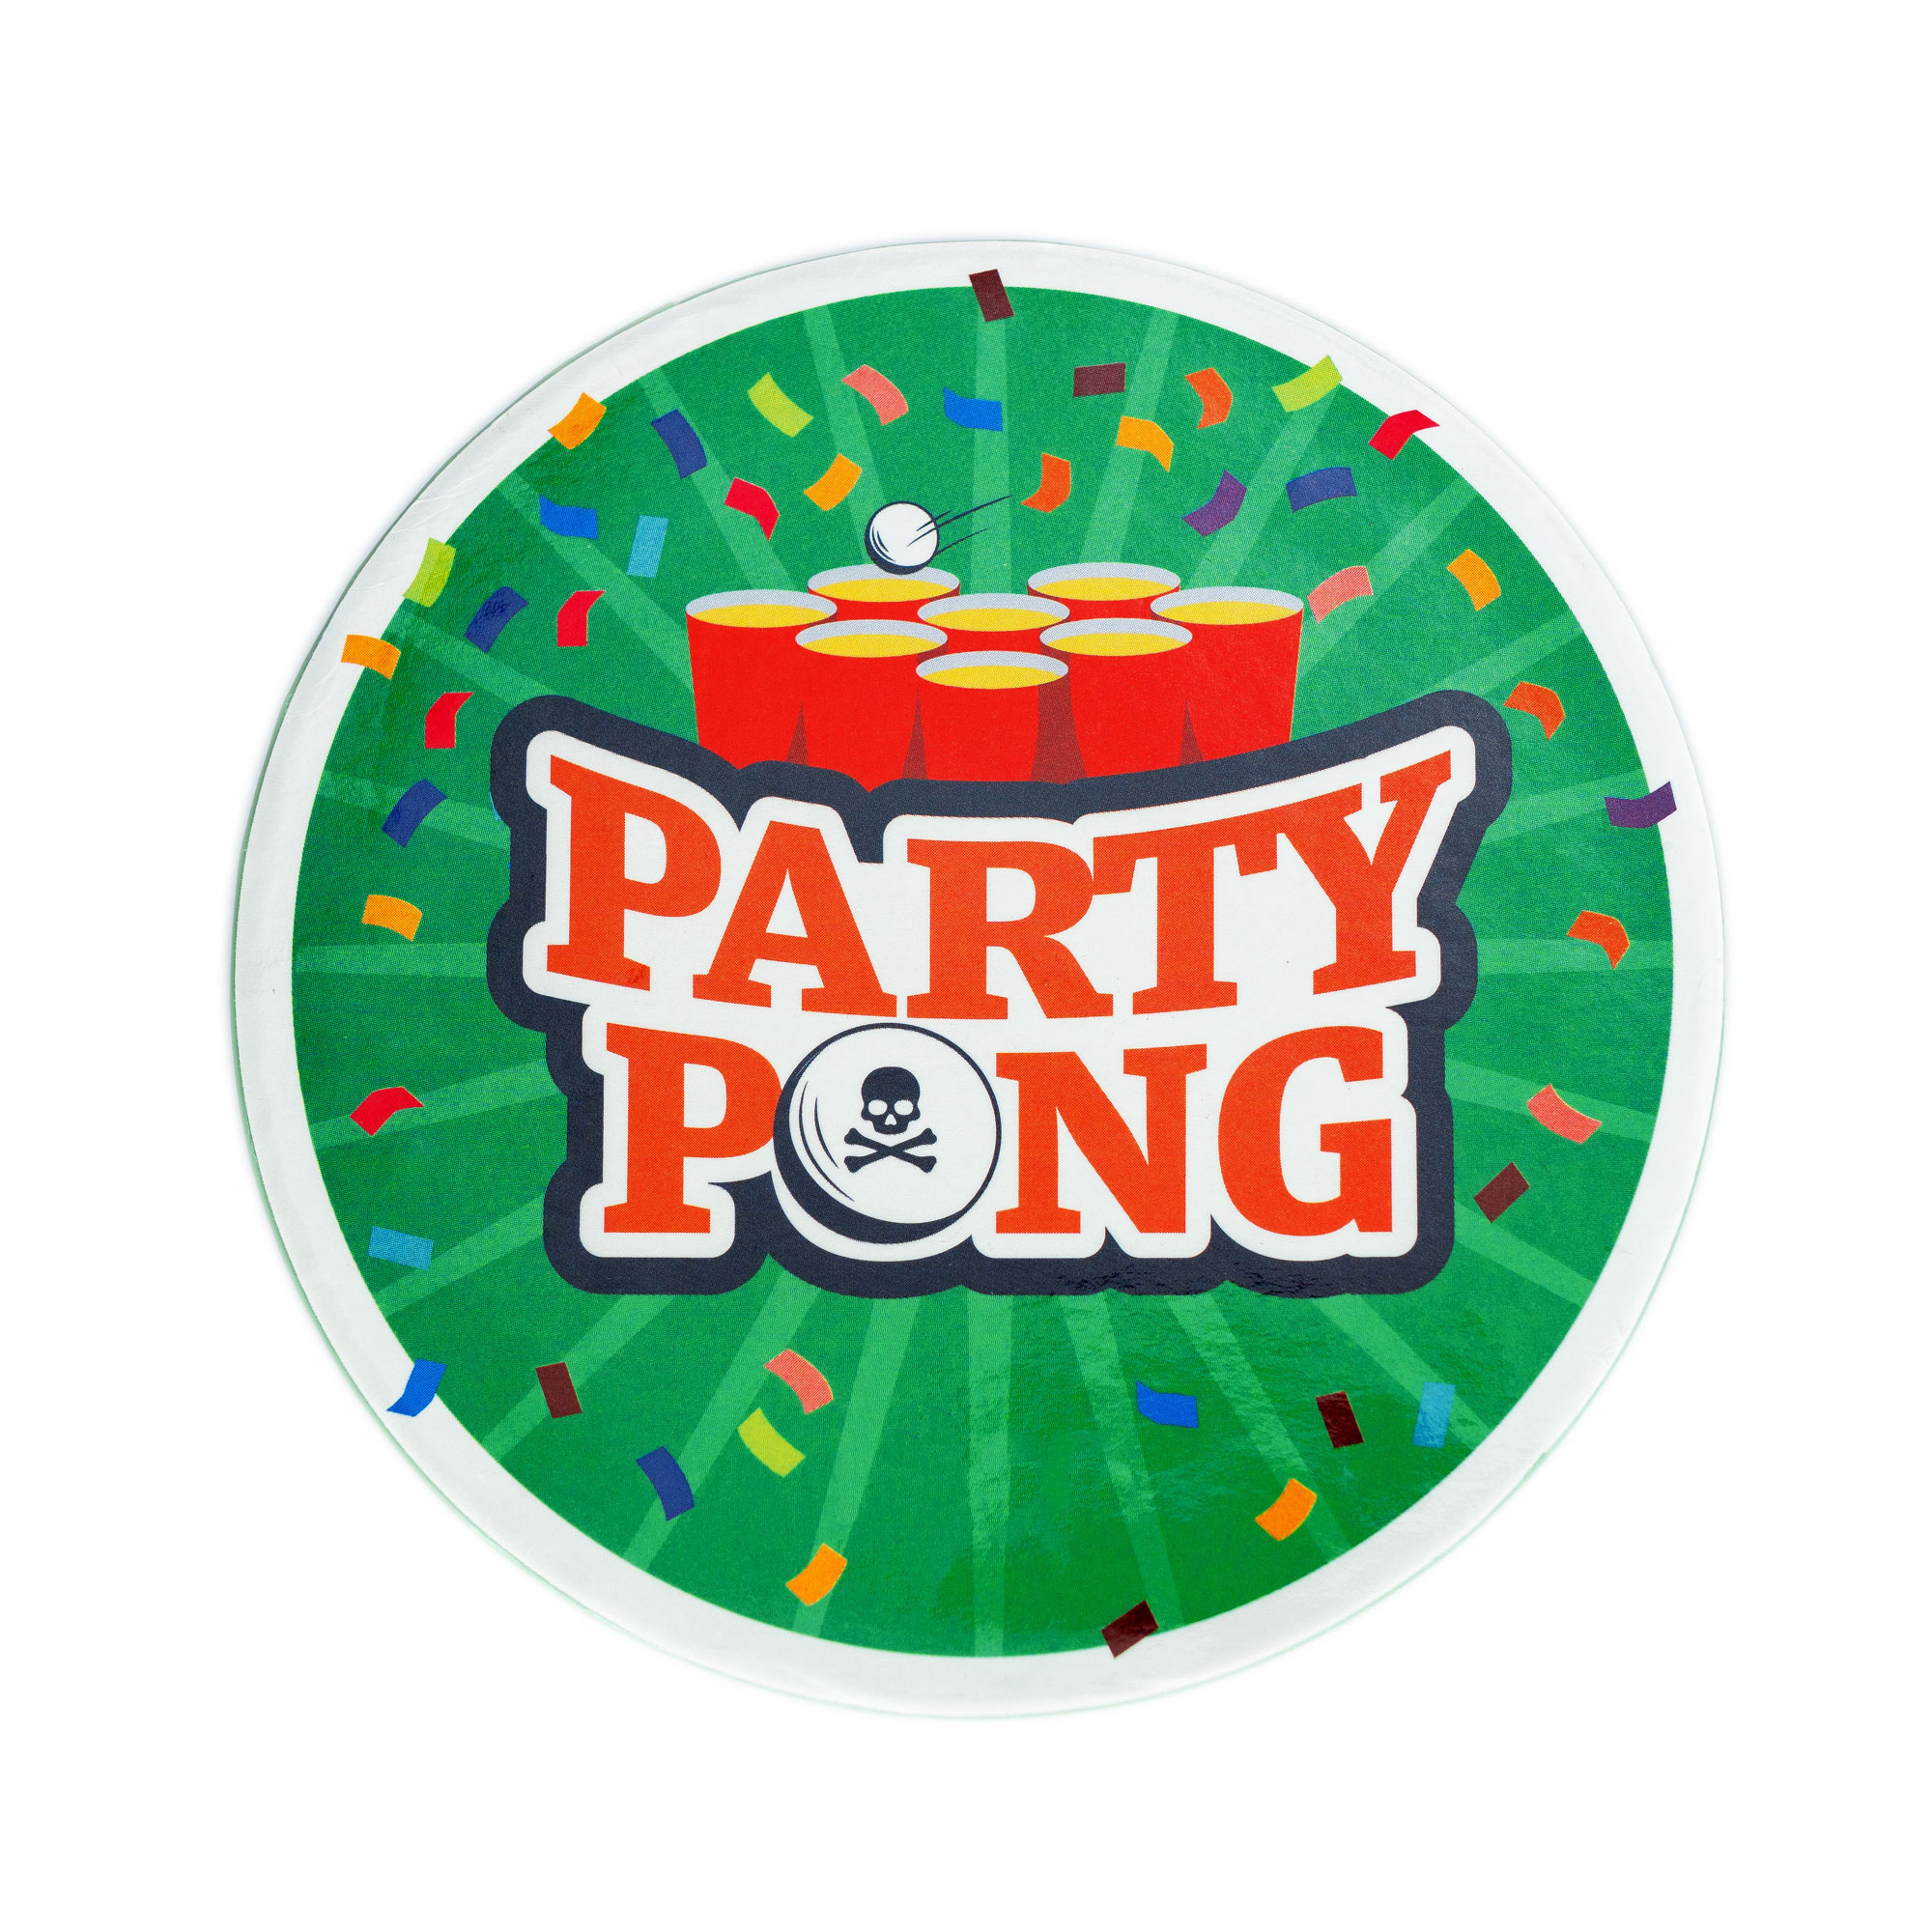 Partypong - Partygame